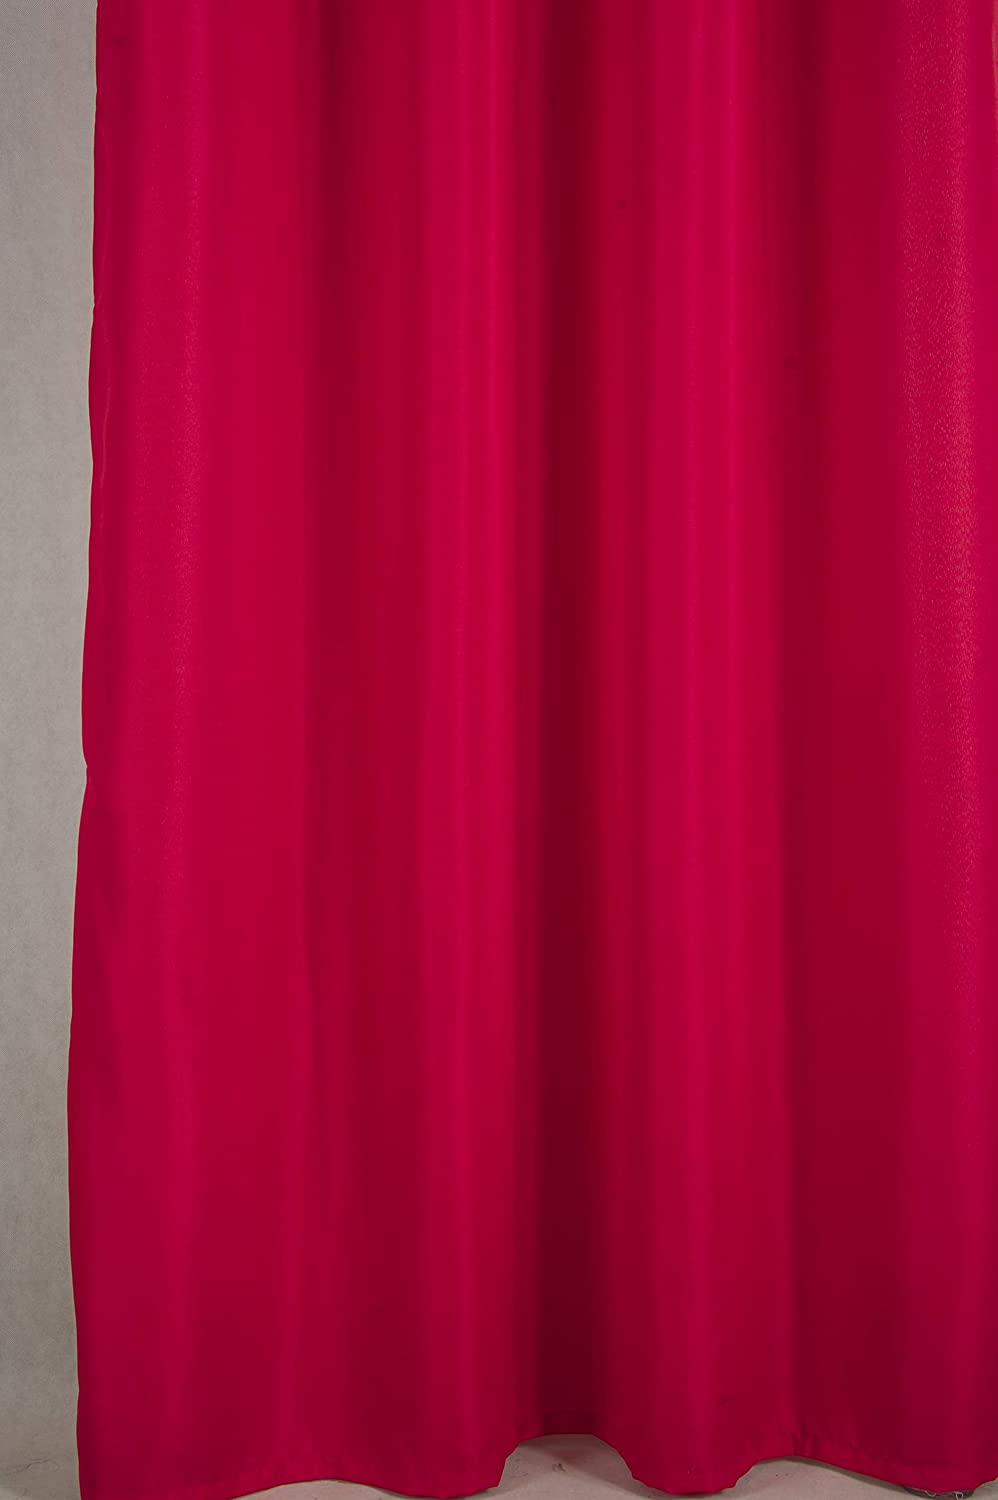 Gilbert Solid 54 x 84 in. Single Grommet Curtain Panel - Linen Universe Co.